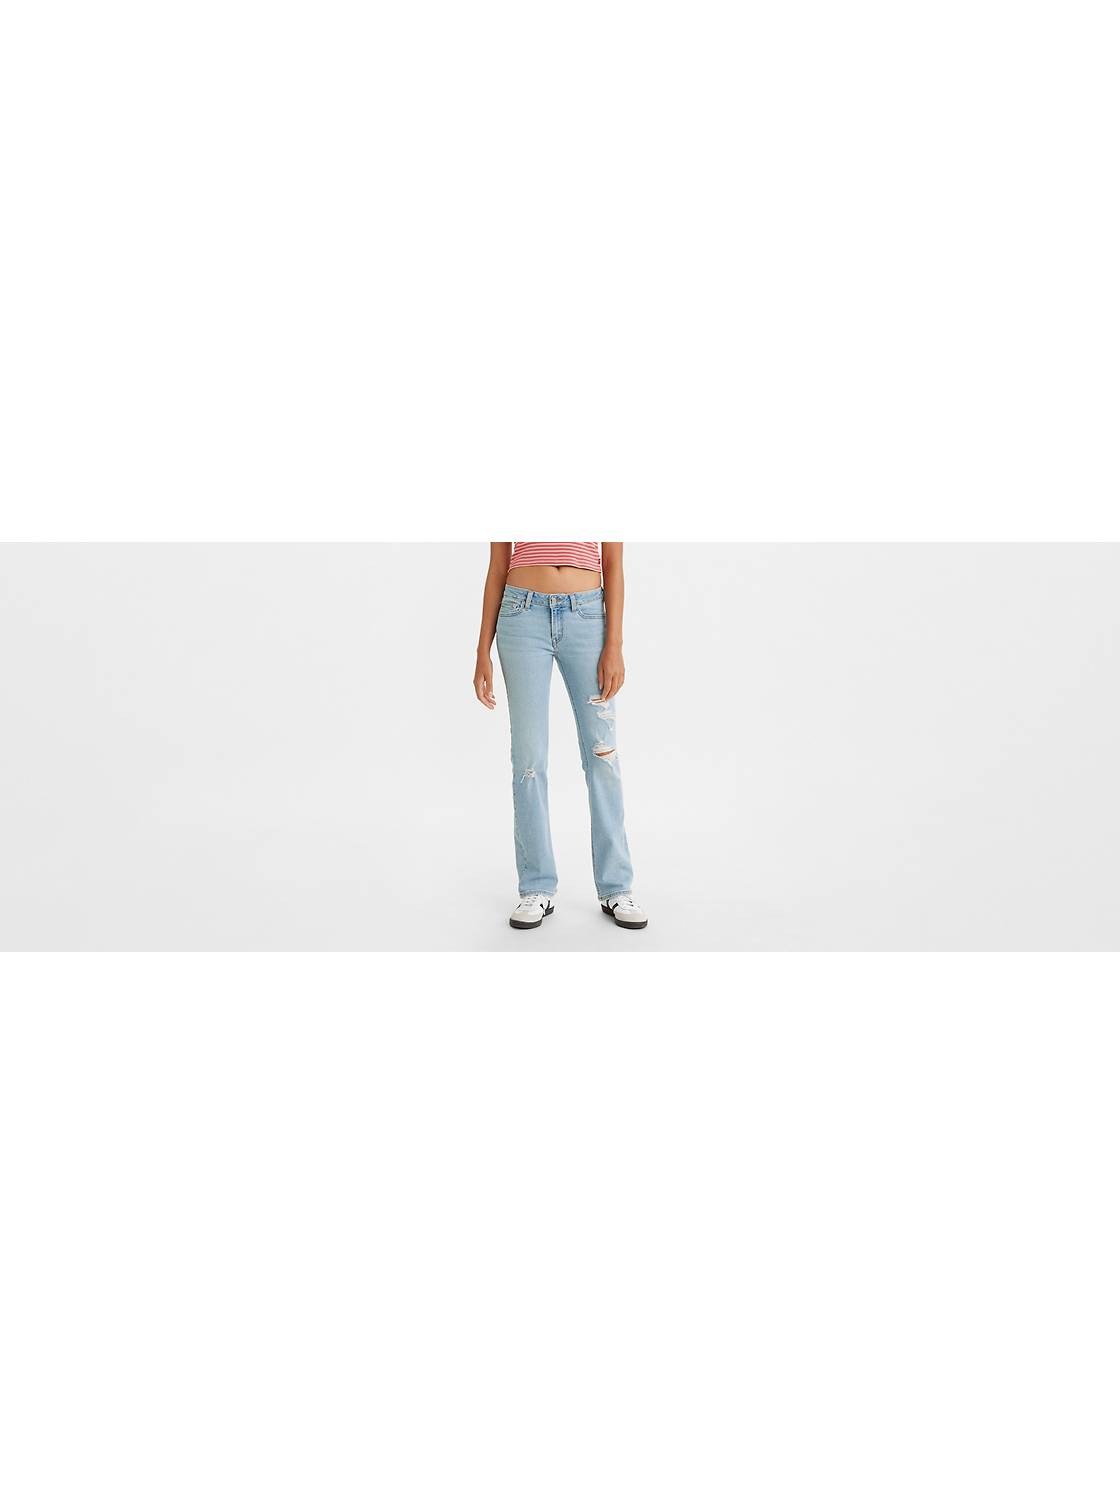 Signature by Levi Strauss & Co. Women's Low Rise Jeggings